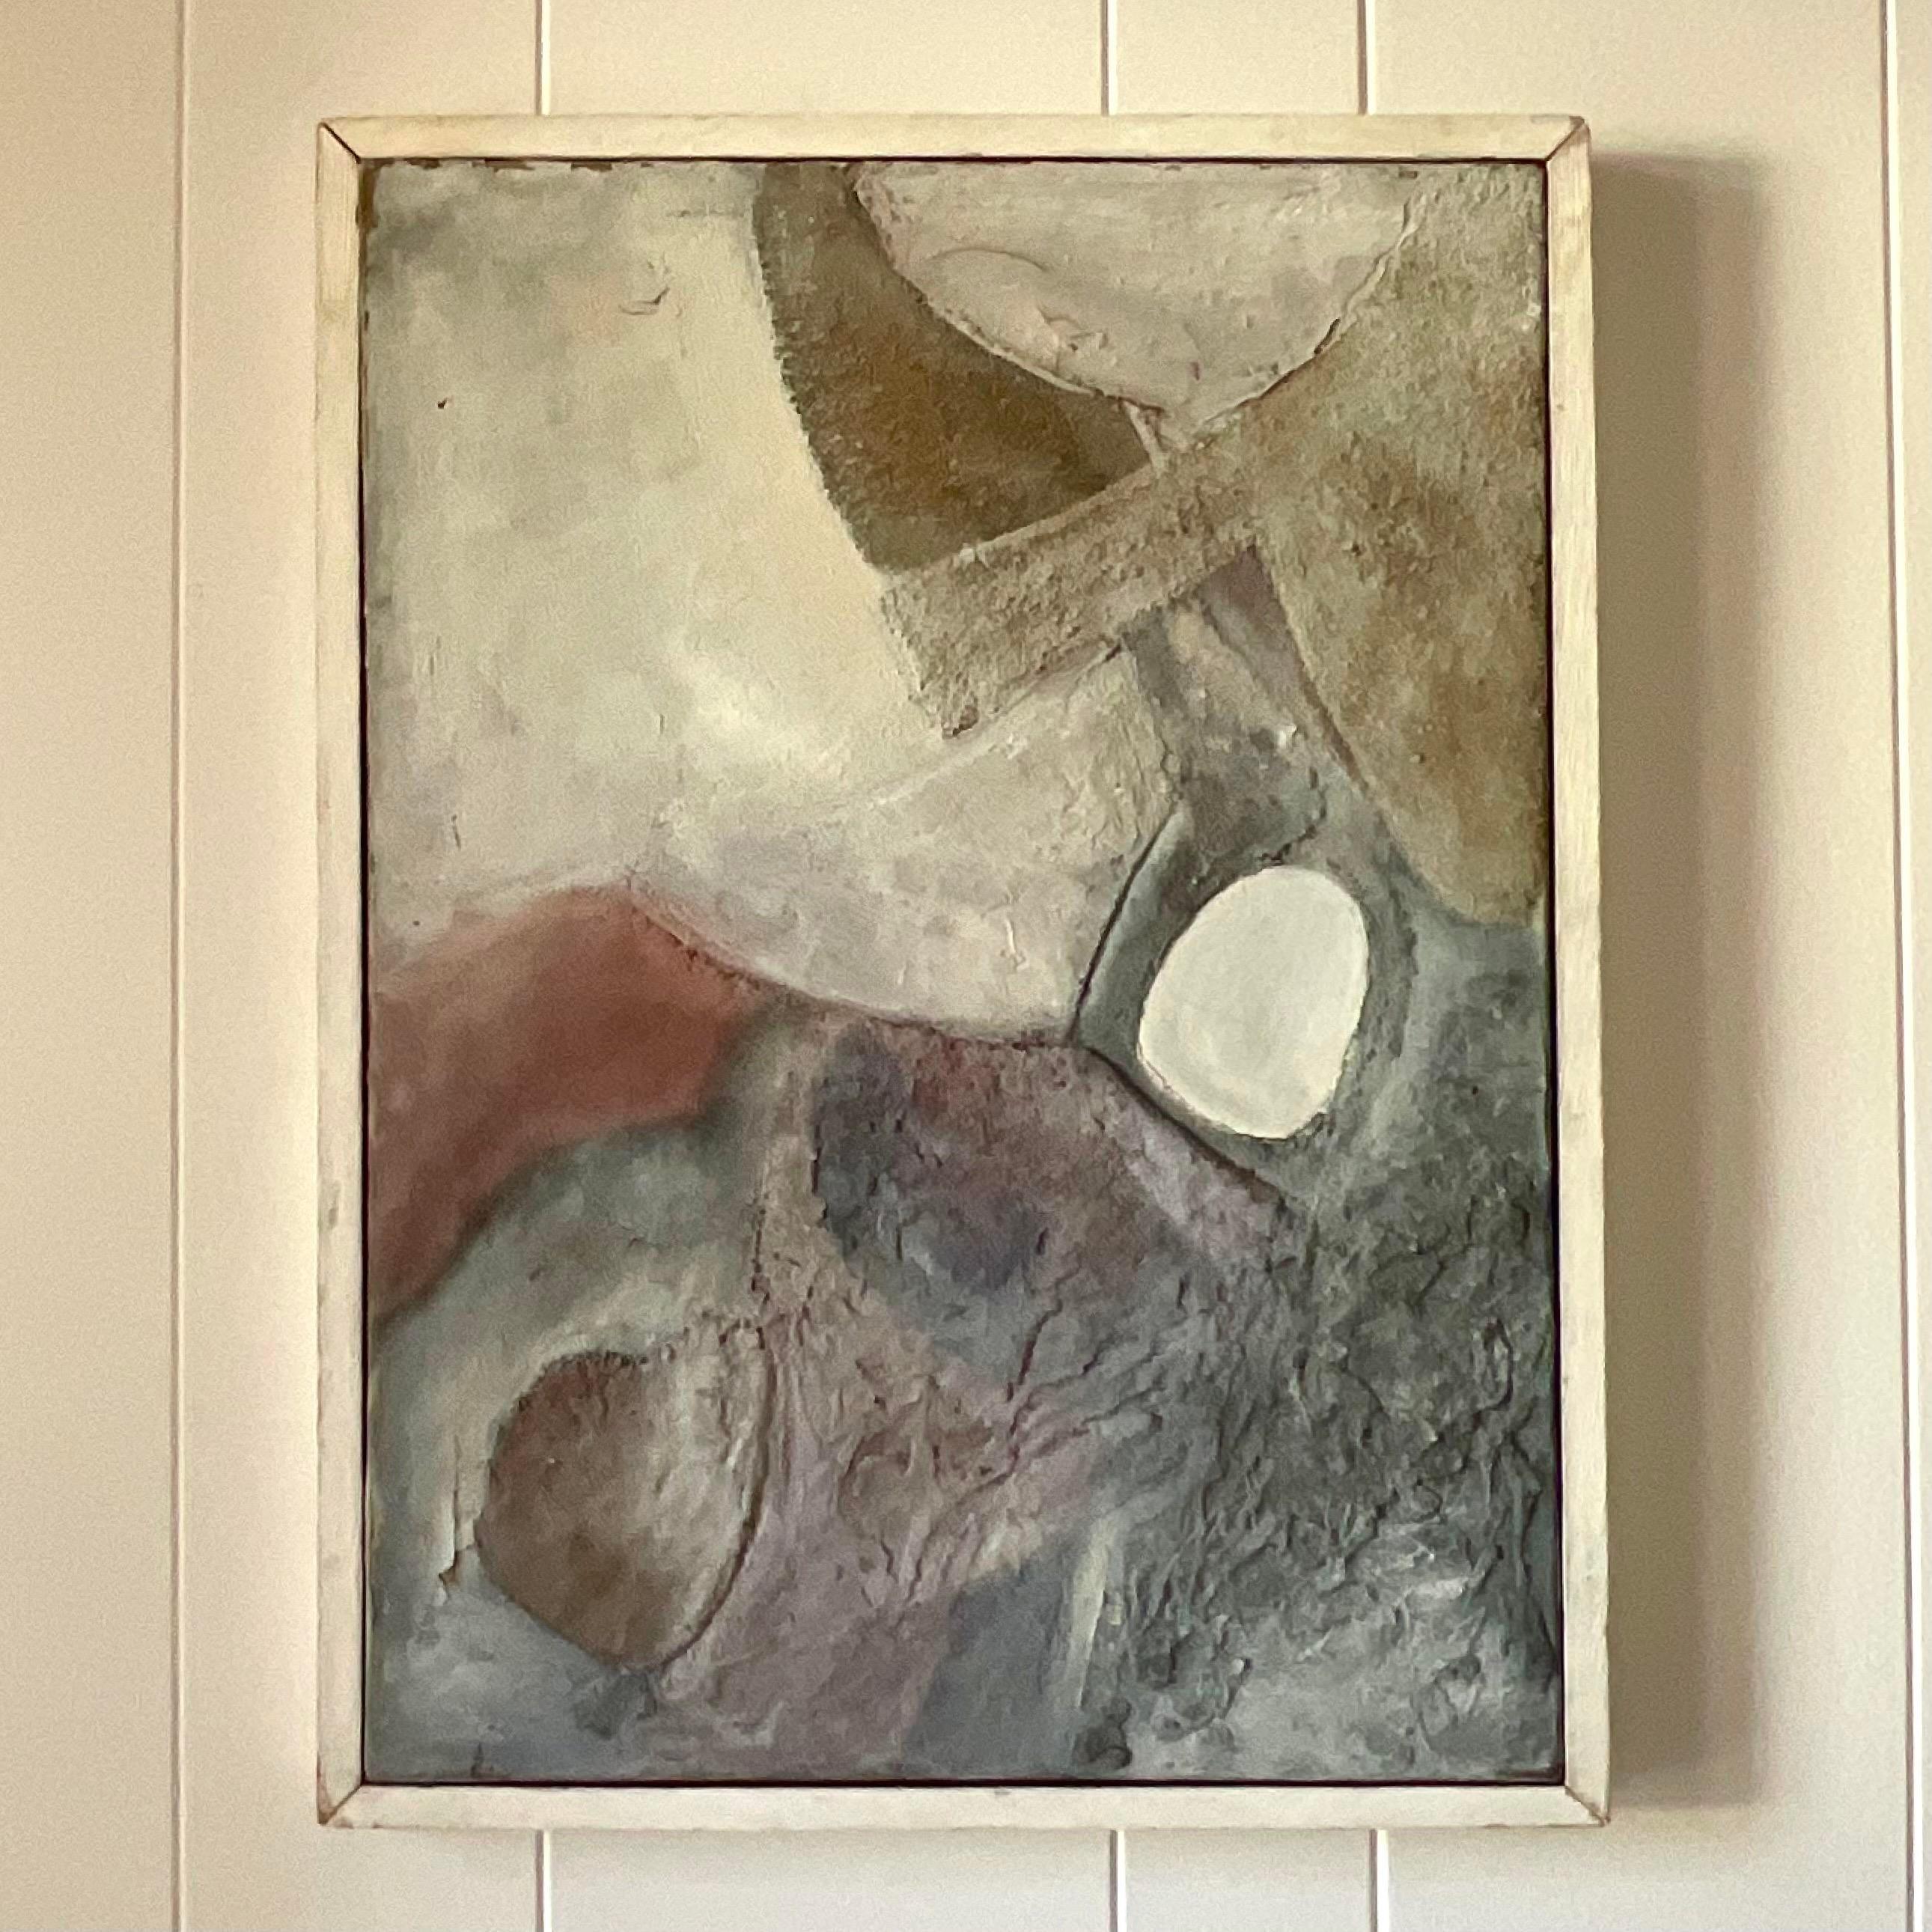 A vintage Mid-Century Modern original oil painting on canvas. A chic Abstract composition in pale neutral colors. Signed and Dated 1963. Acquired from an Miami estate.